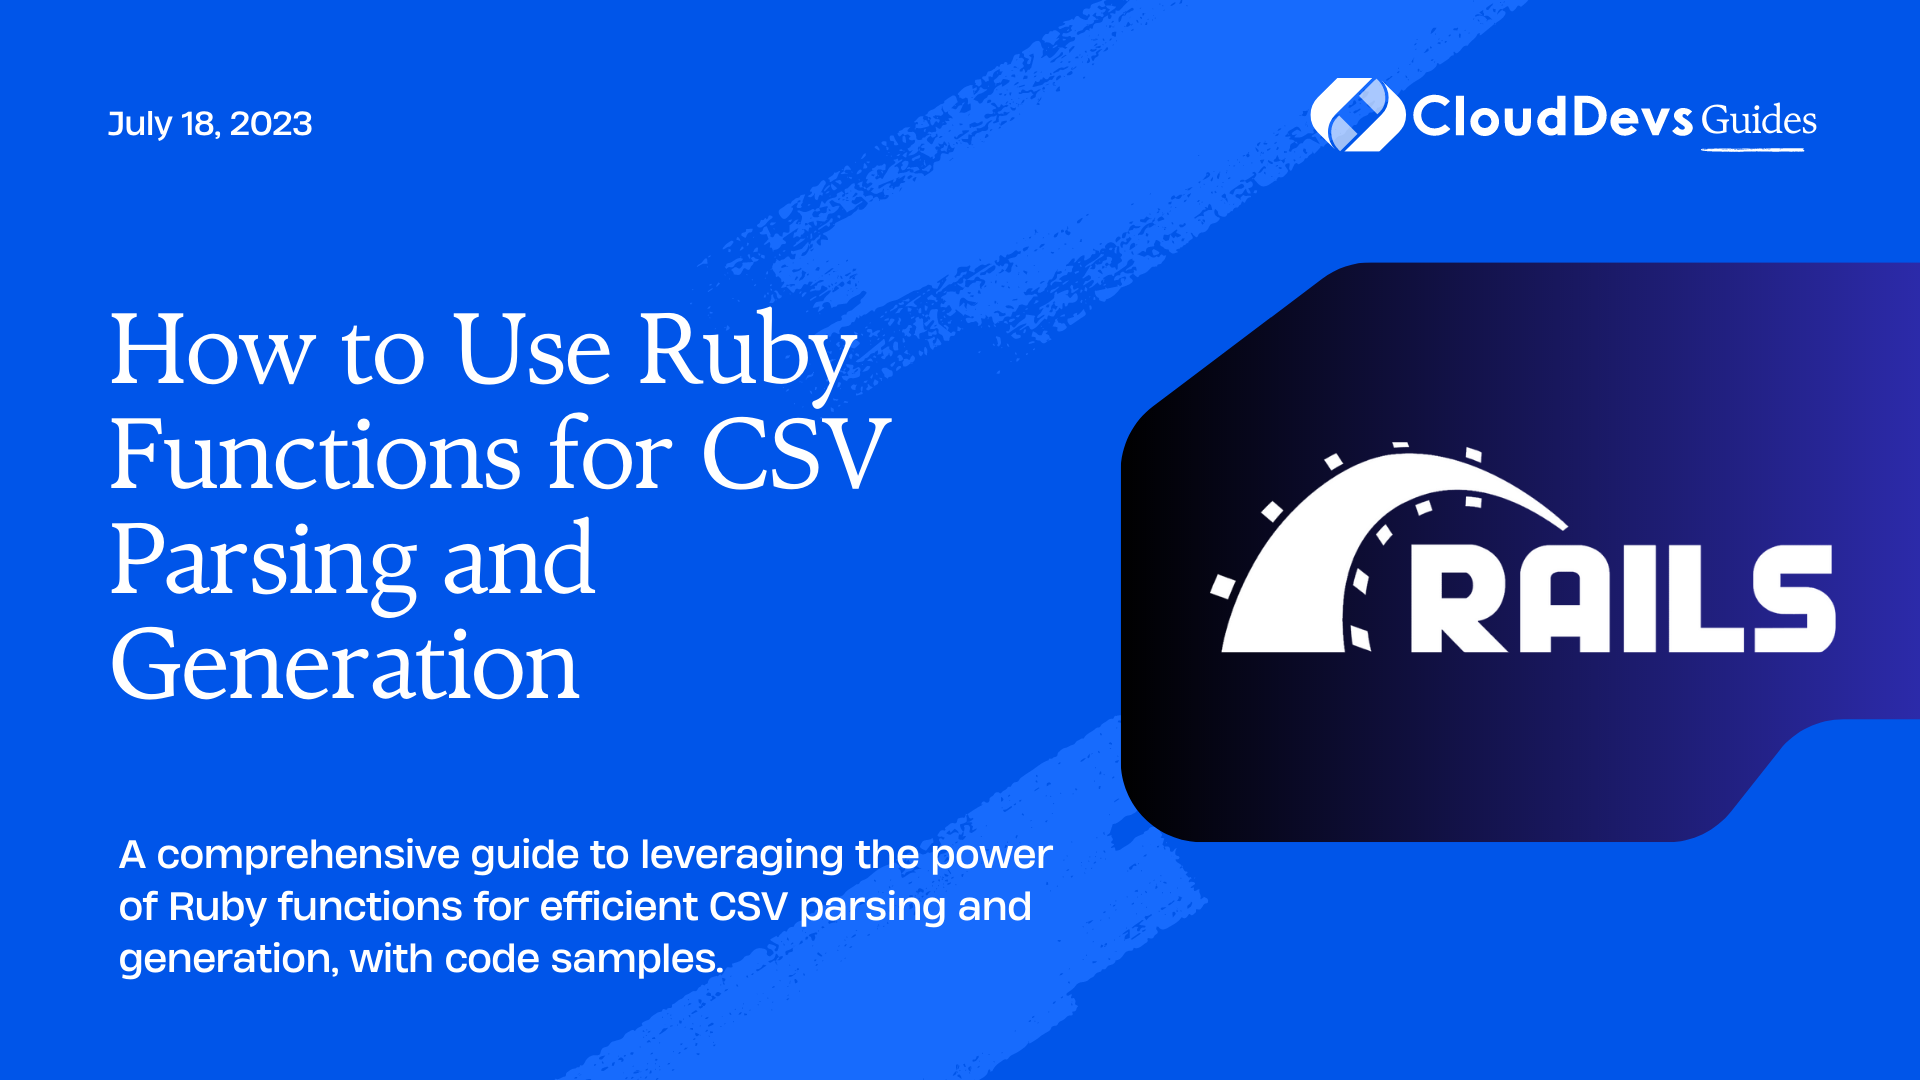 How to Use Ruby Functions for CSV Parsing and Generation